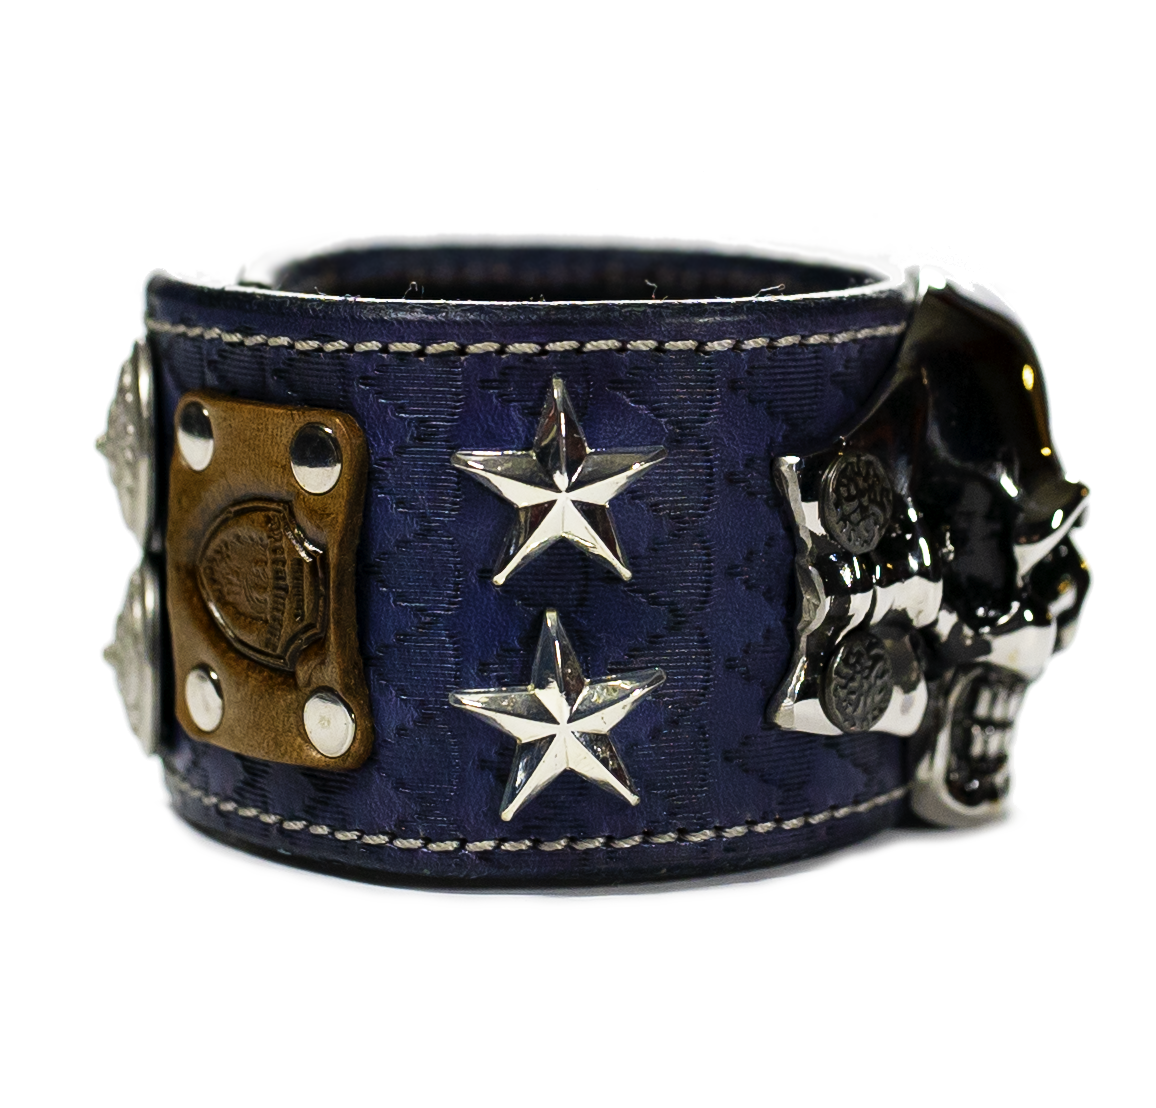 The Big Skull Navy Leather Cuff Label side